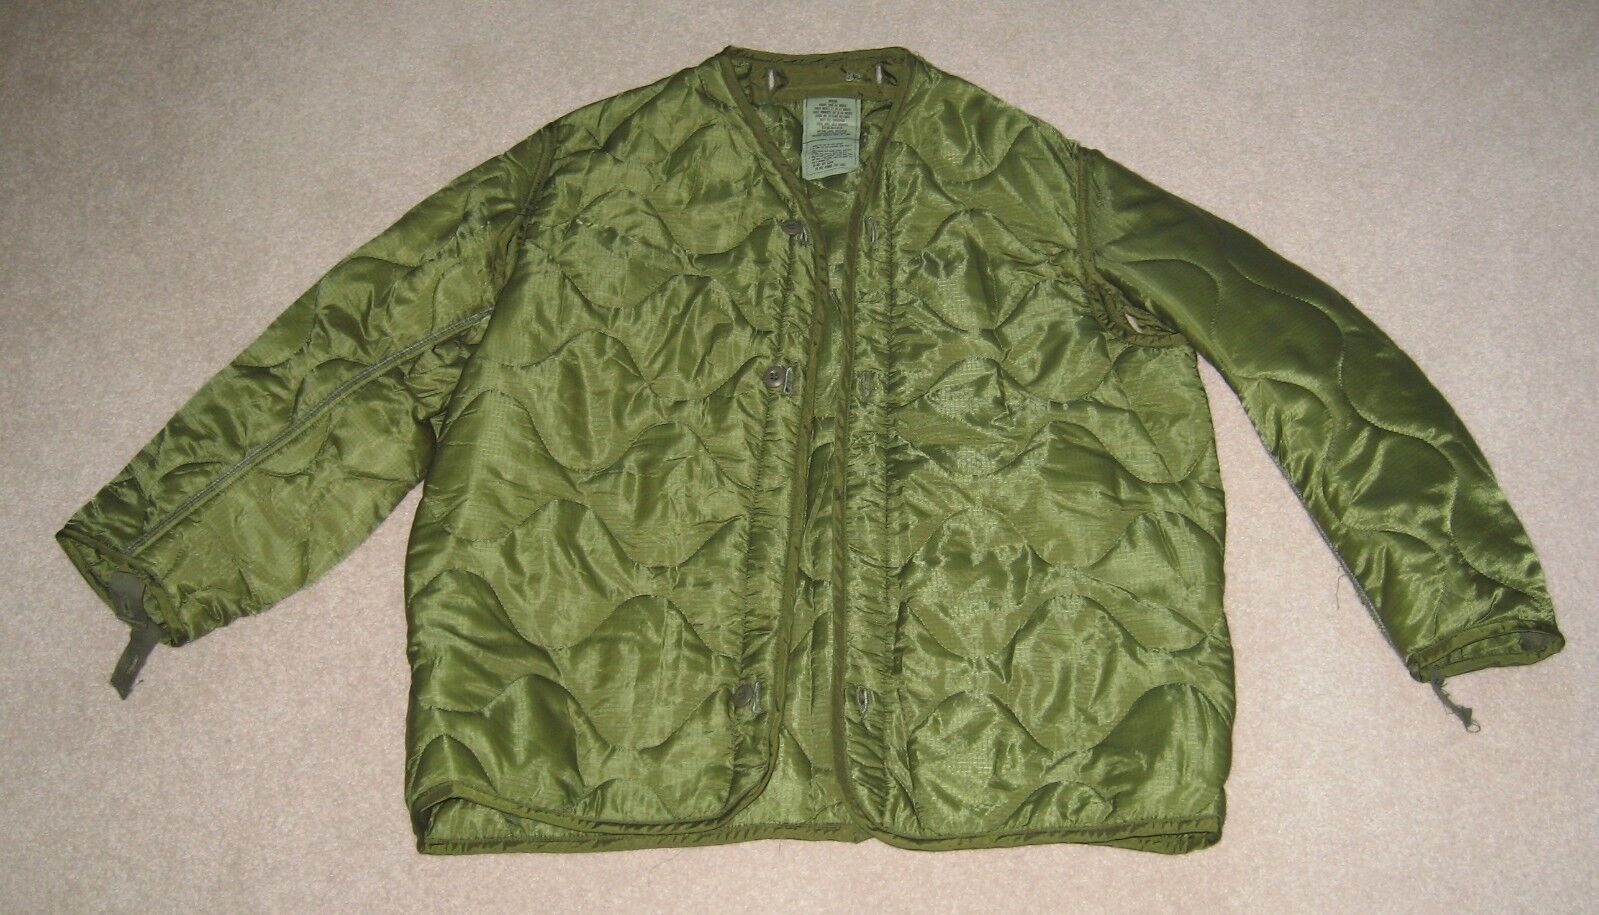 Vintage Cold Weather Coat Jacket Liner Size Medium Button In Brand New USA